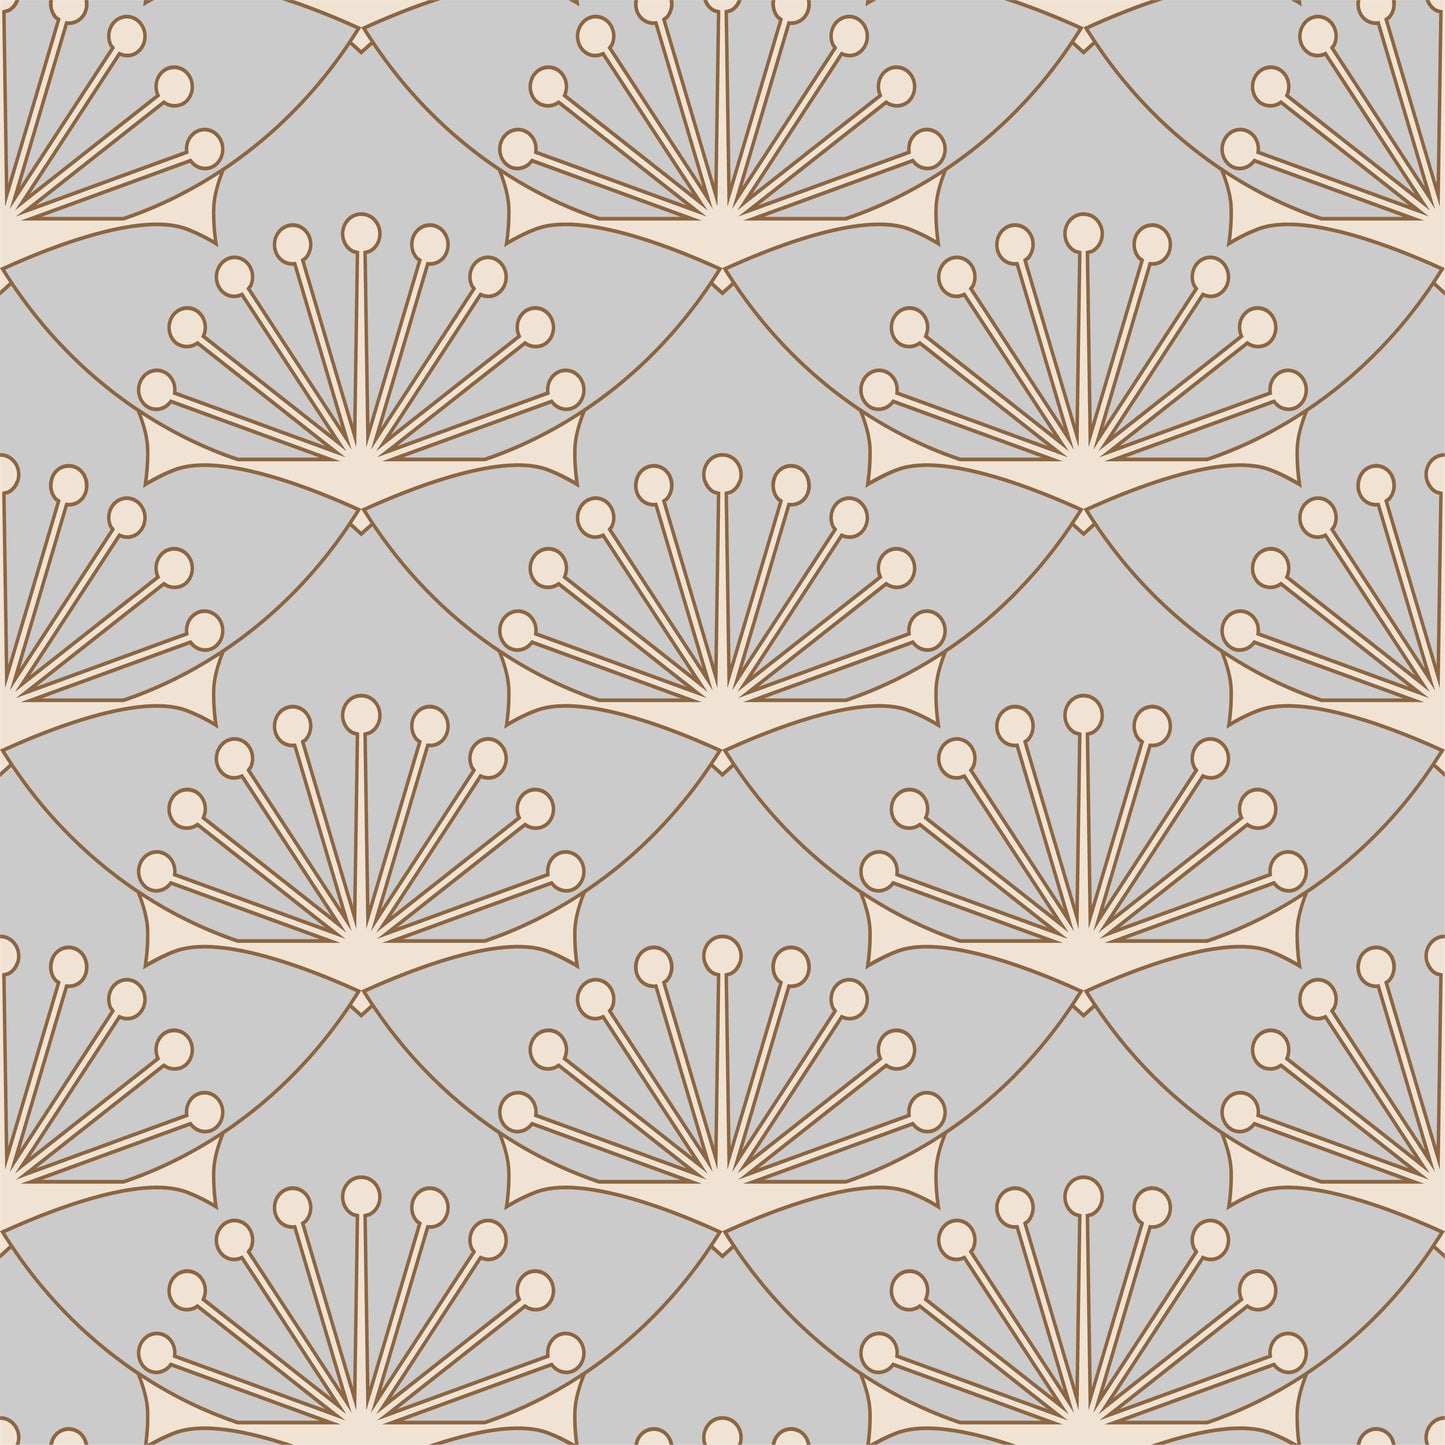 Art Deco Style Lotus Flower Removable Peel And Stick Wallpaper